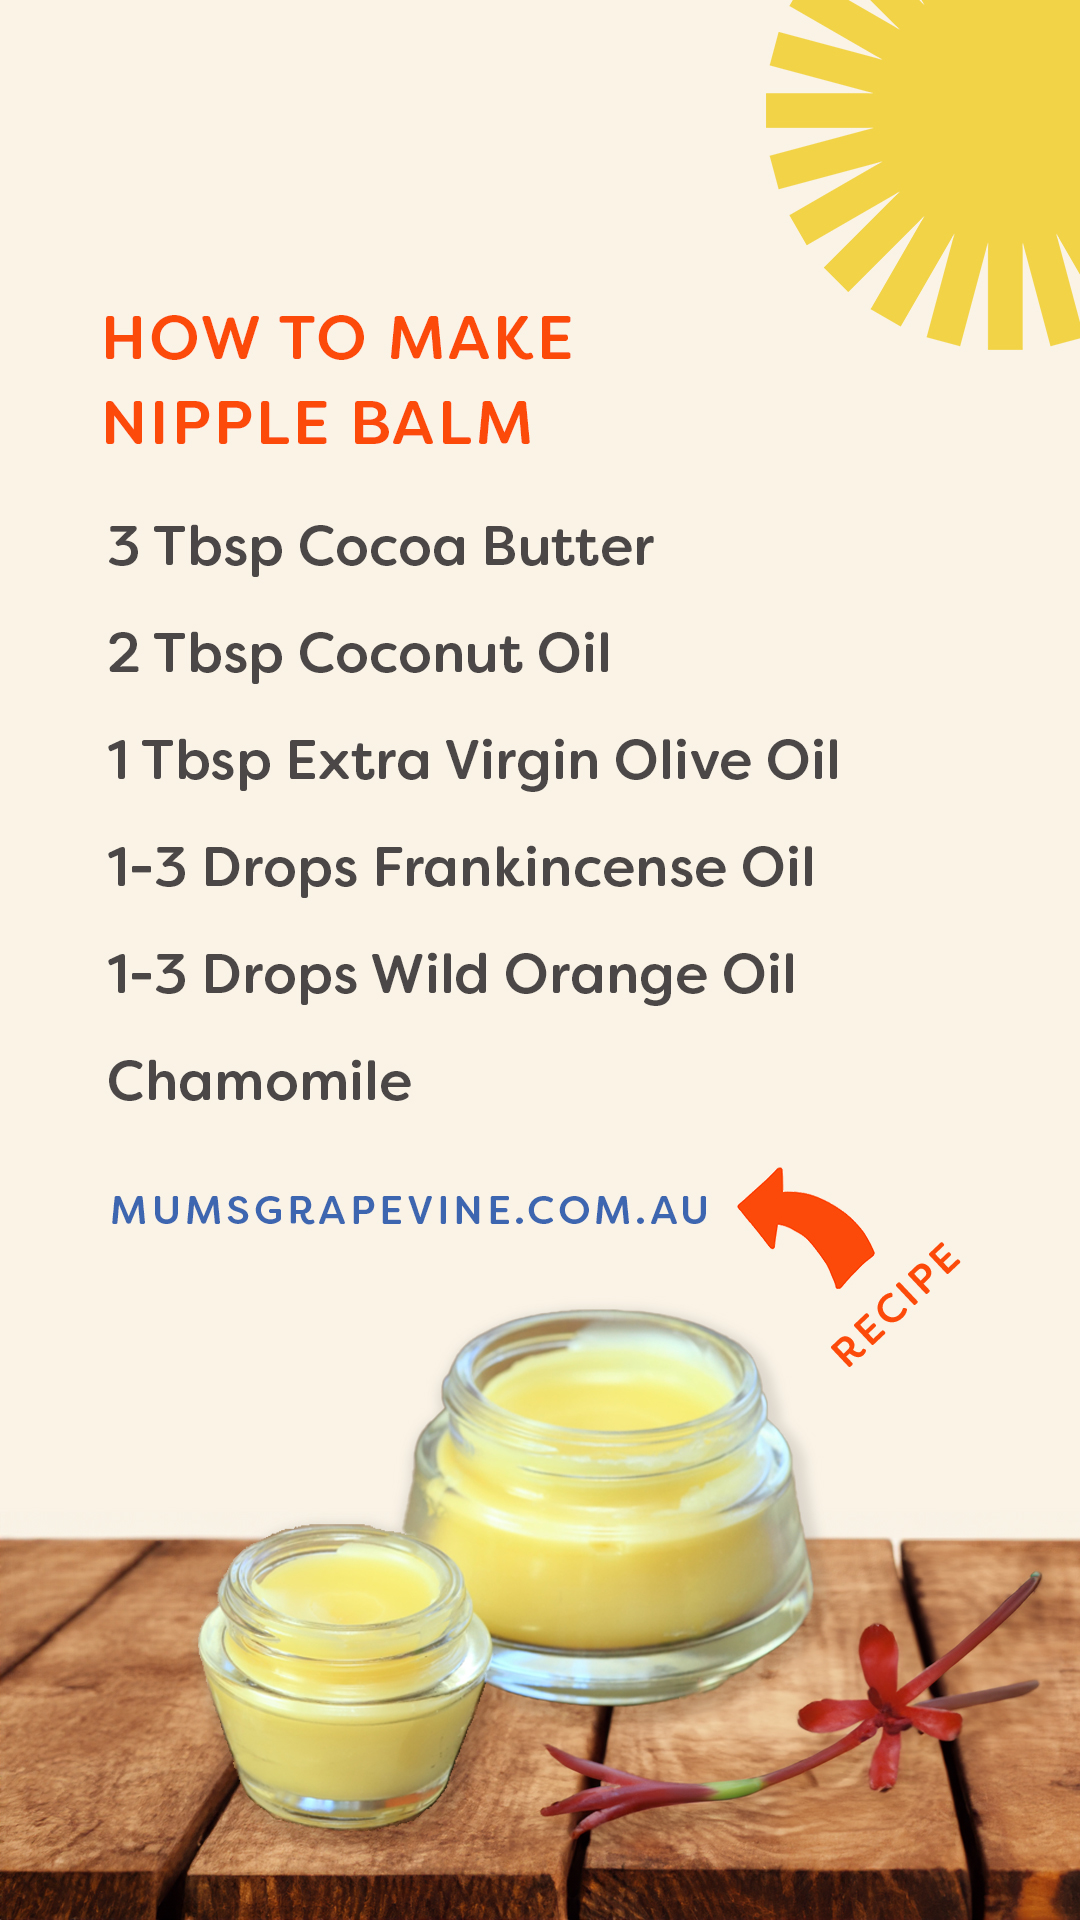 Ingredients listed to make homemade nipple balm